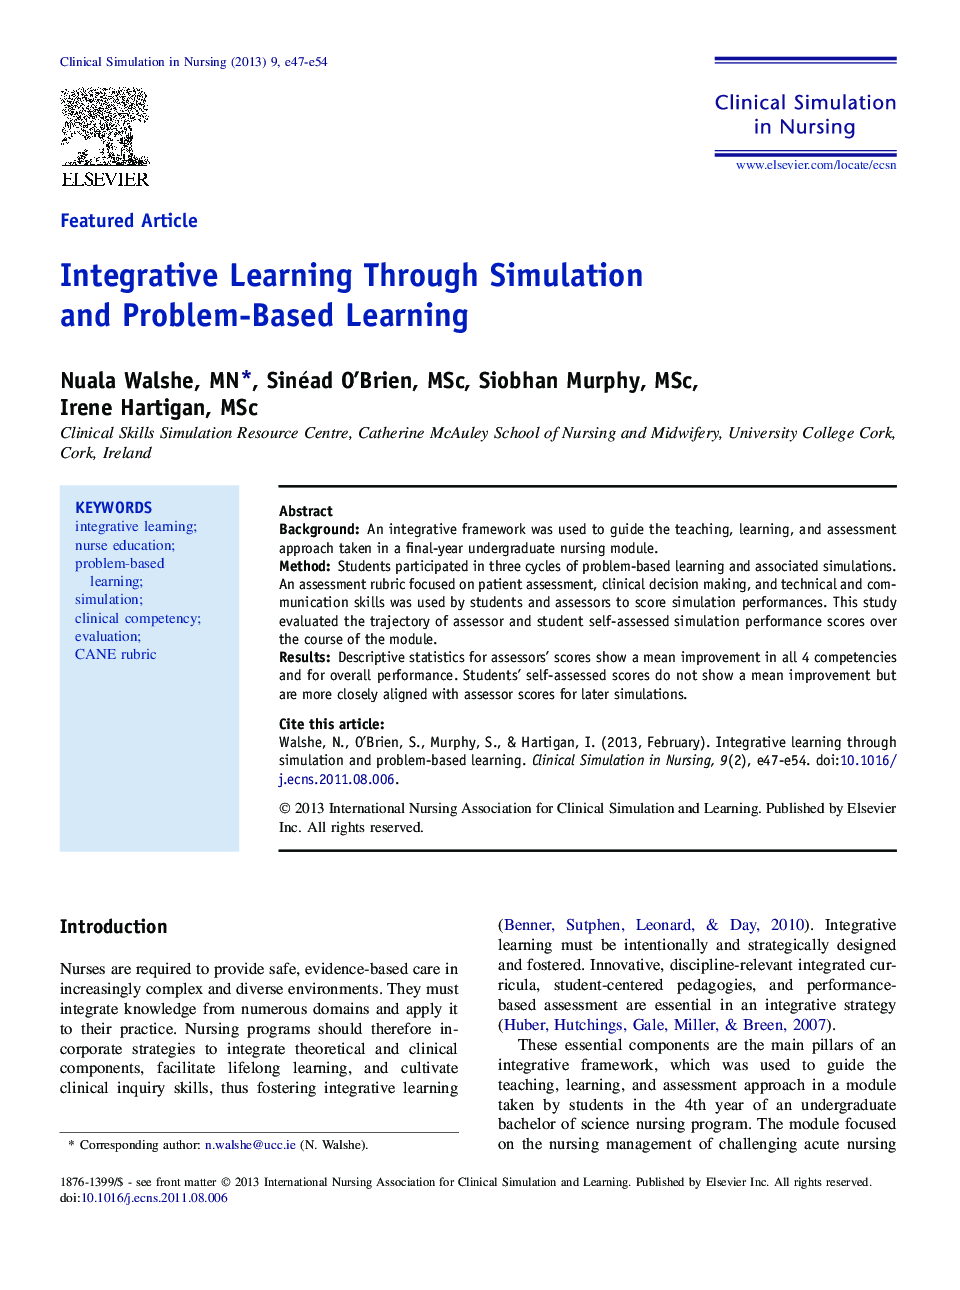 Integrative Learning Through Simulation and Problem-Based Learning